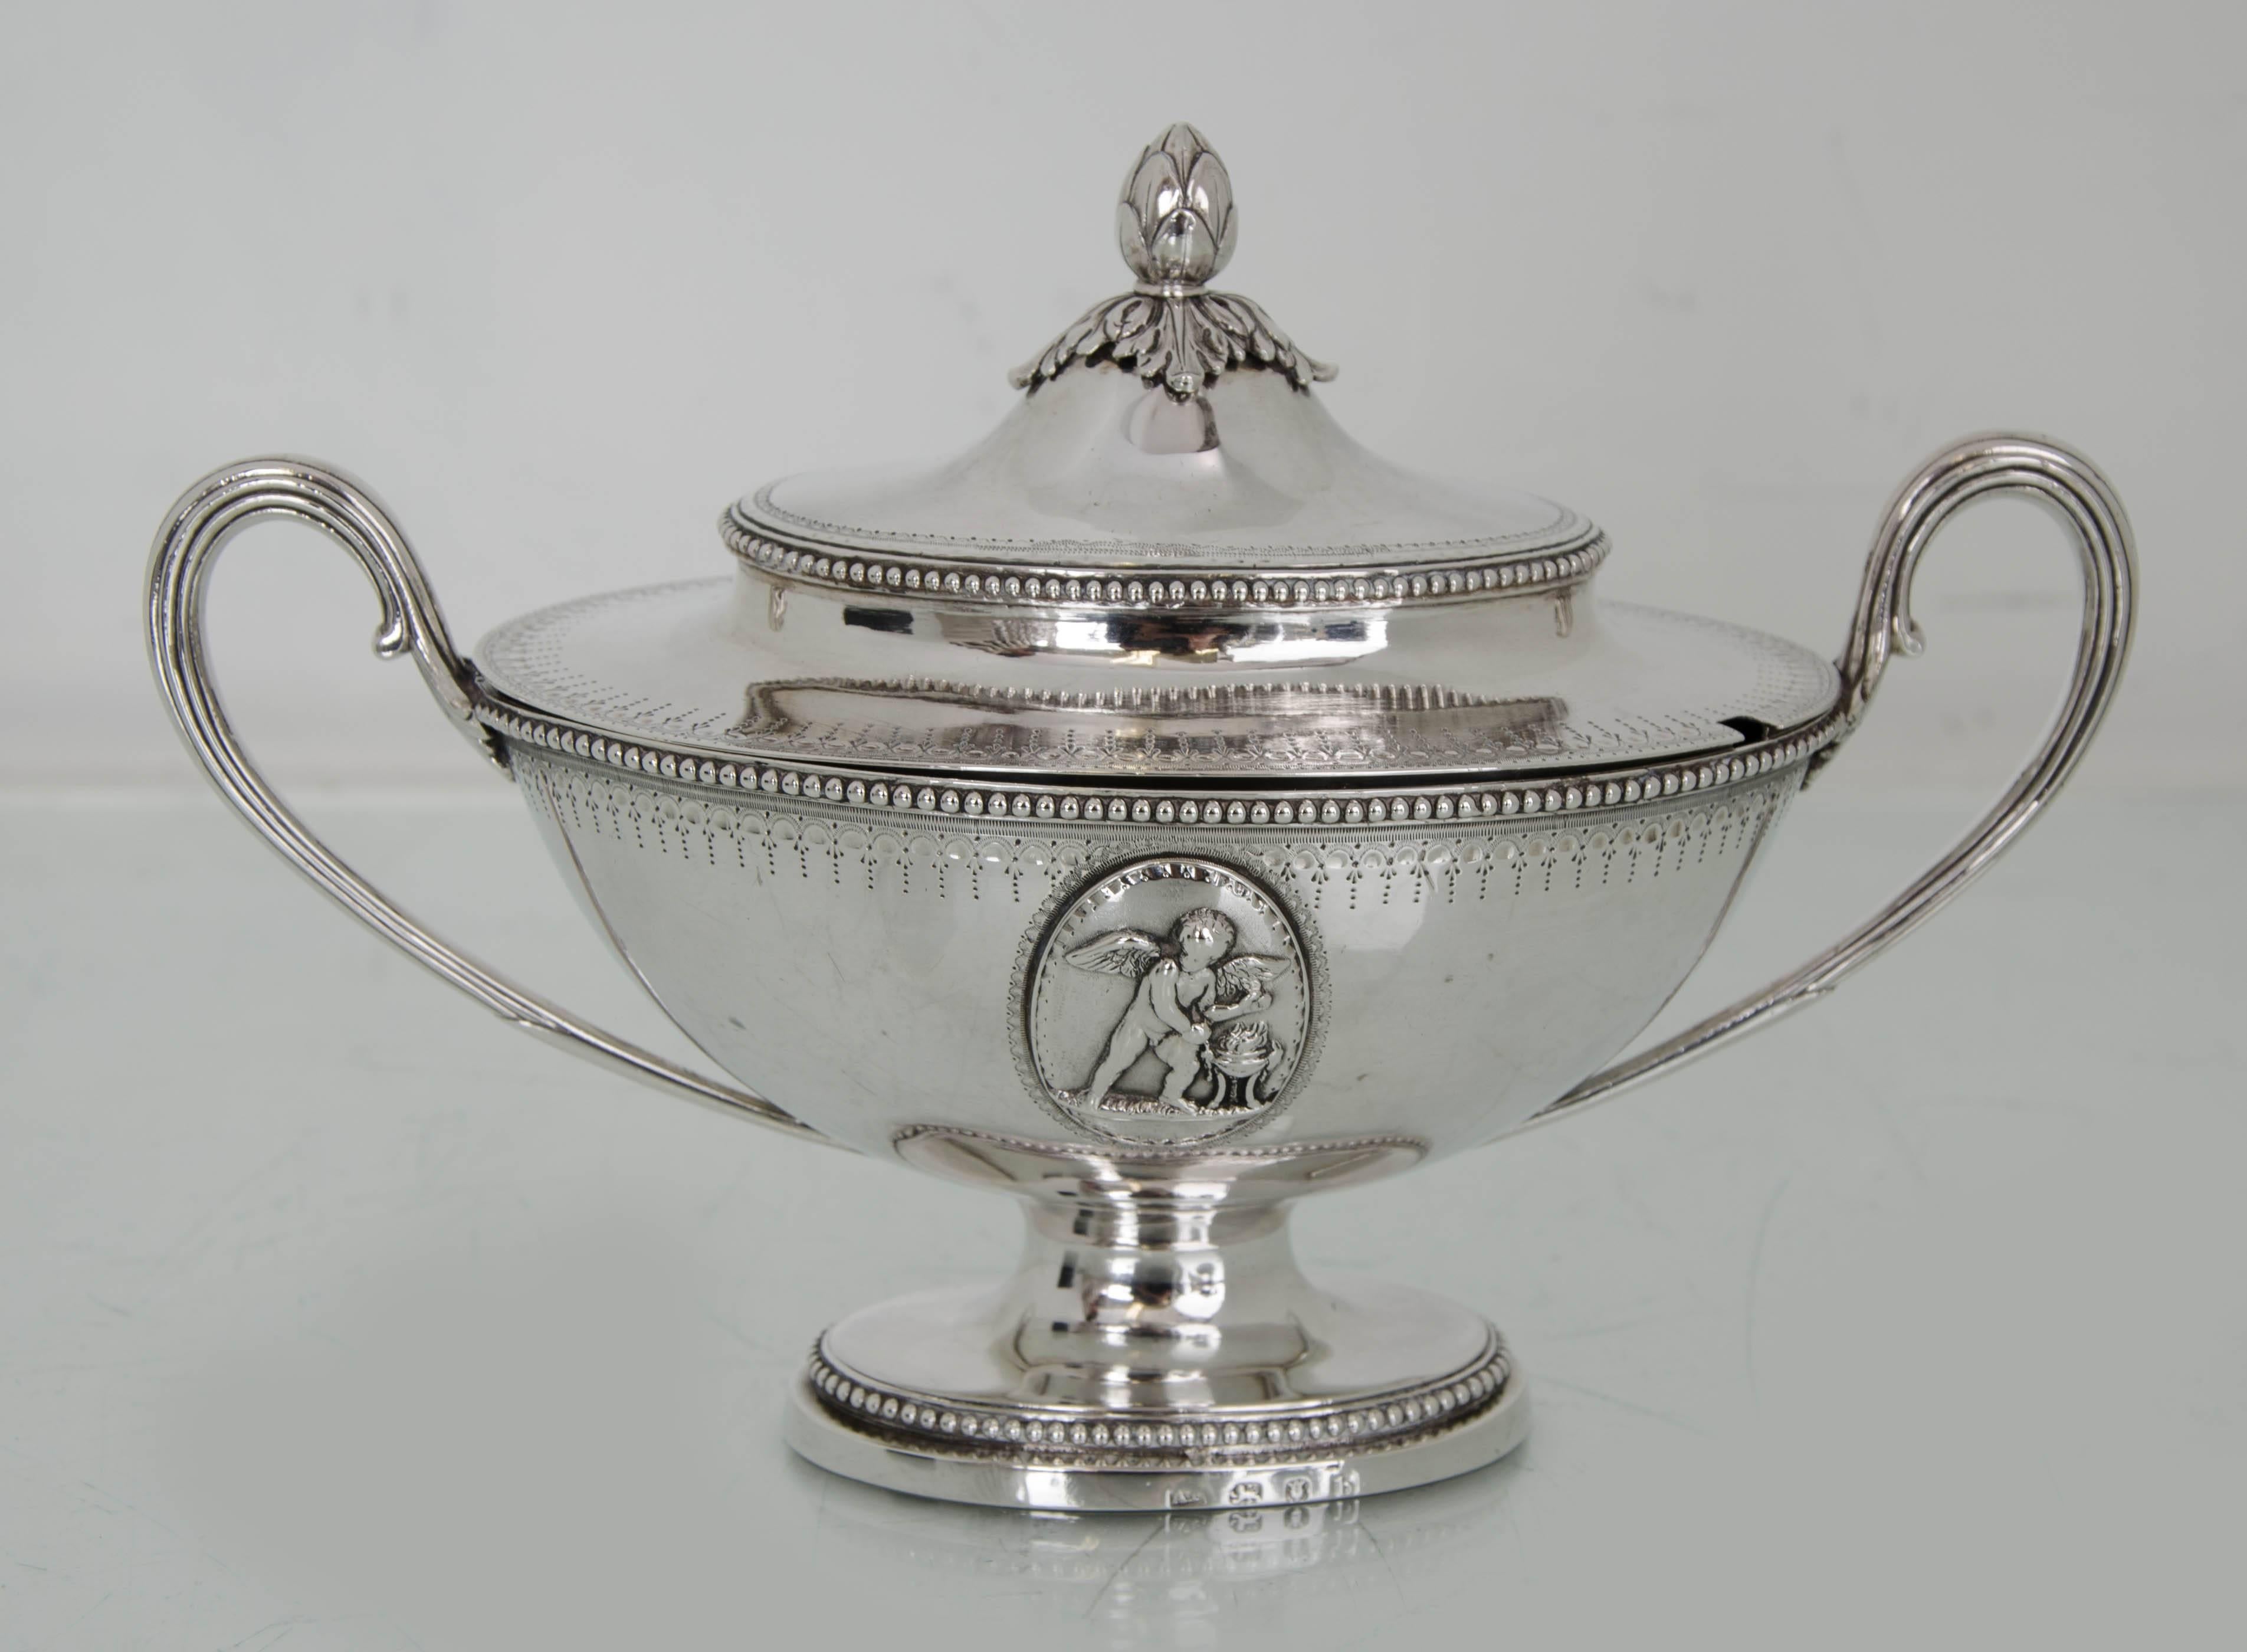 Suite of four 18th century silver sauce tureens London 1777 Andrew Fogelberg

A suite of four beaded sauce tureens with single scroll handles. The sauce tureens benefit from bright cut engraving and applied oval plaques depicting cherubs. The